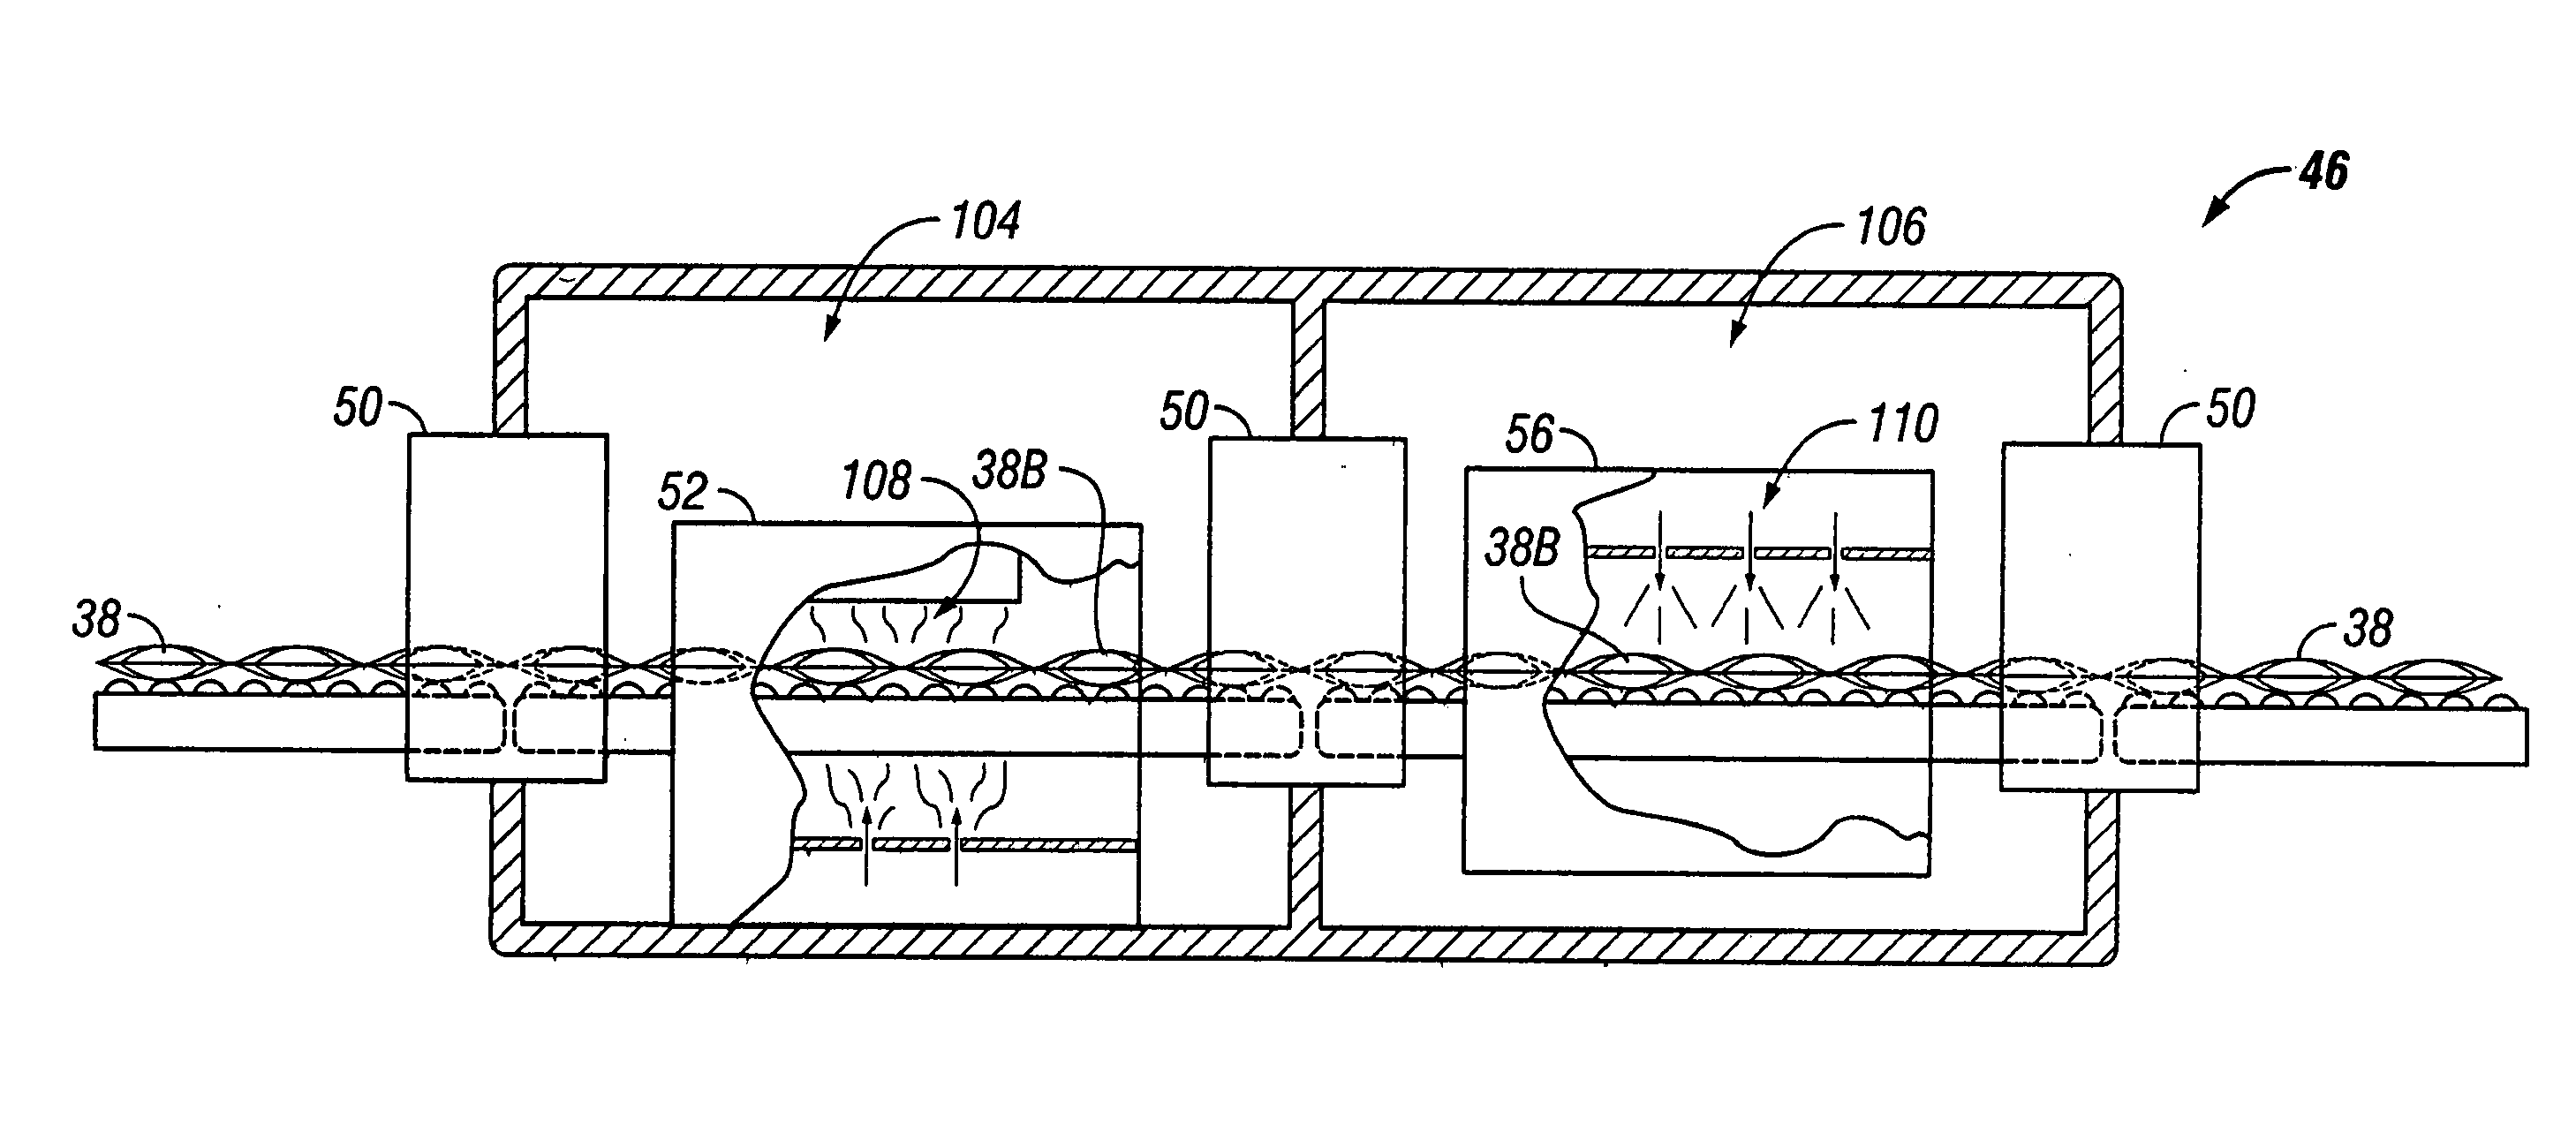 Method and apparatus for continuous processing of packaged products